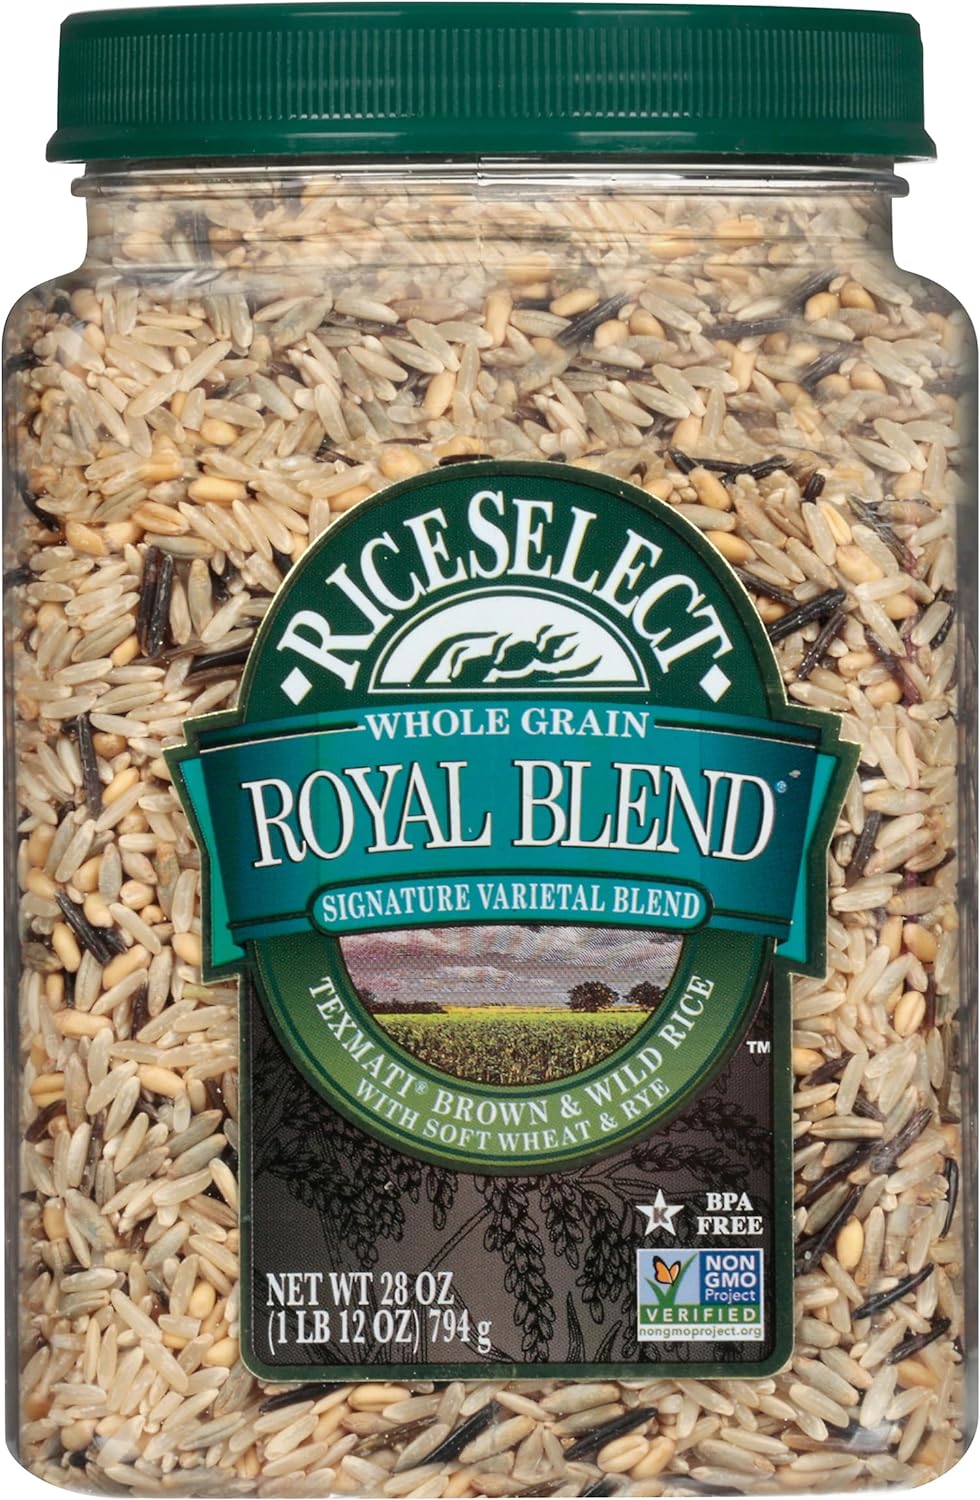 RiceSelect Texmati Brown & Wild Rice Royal Blend, 28 Ounce (Pack of 1)